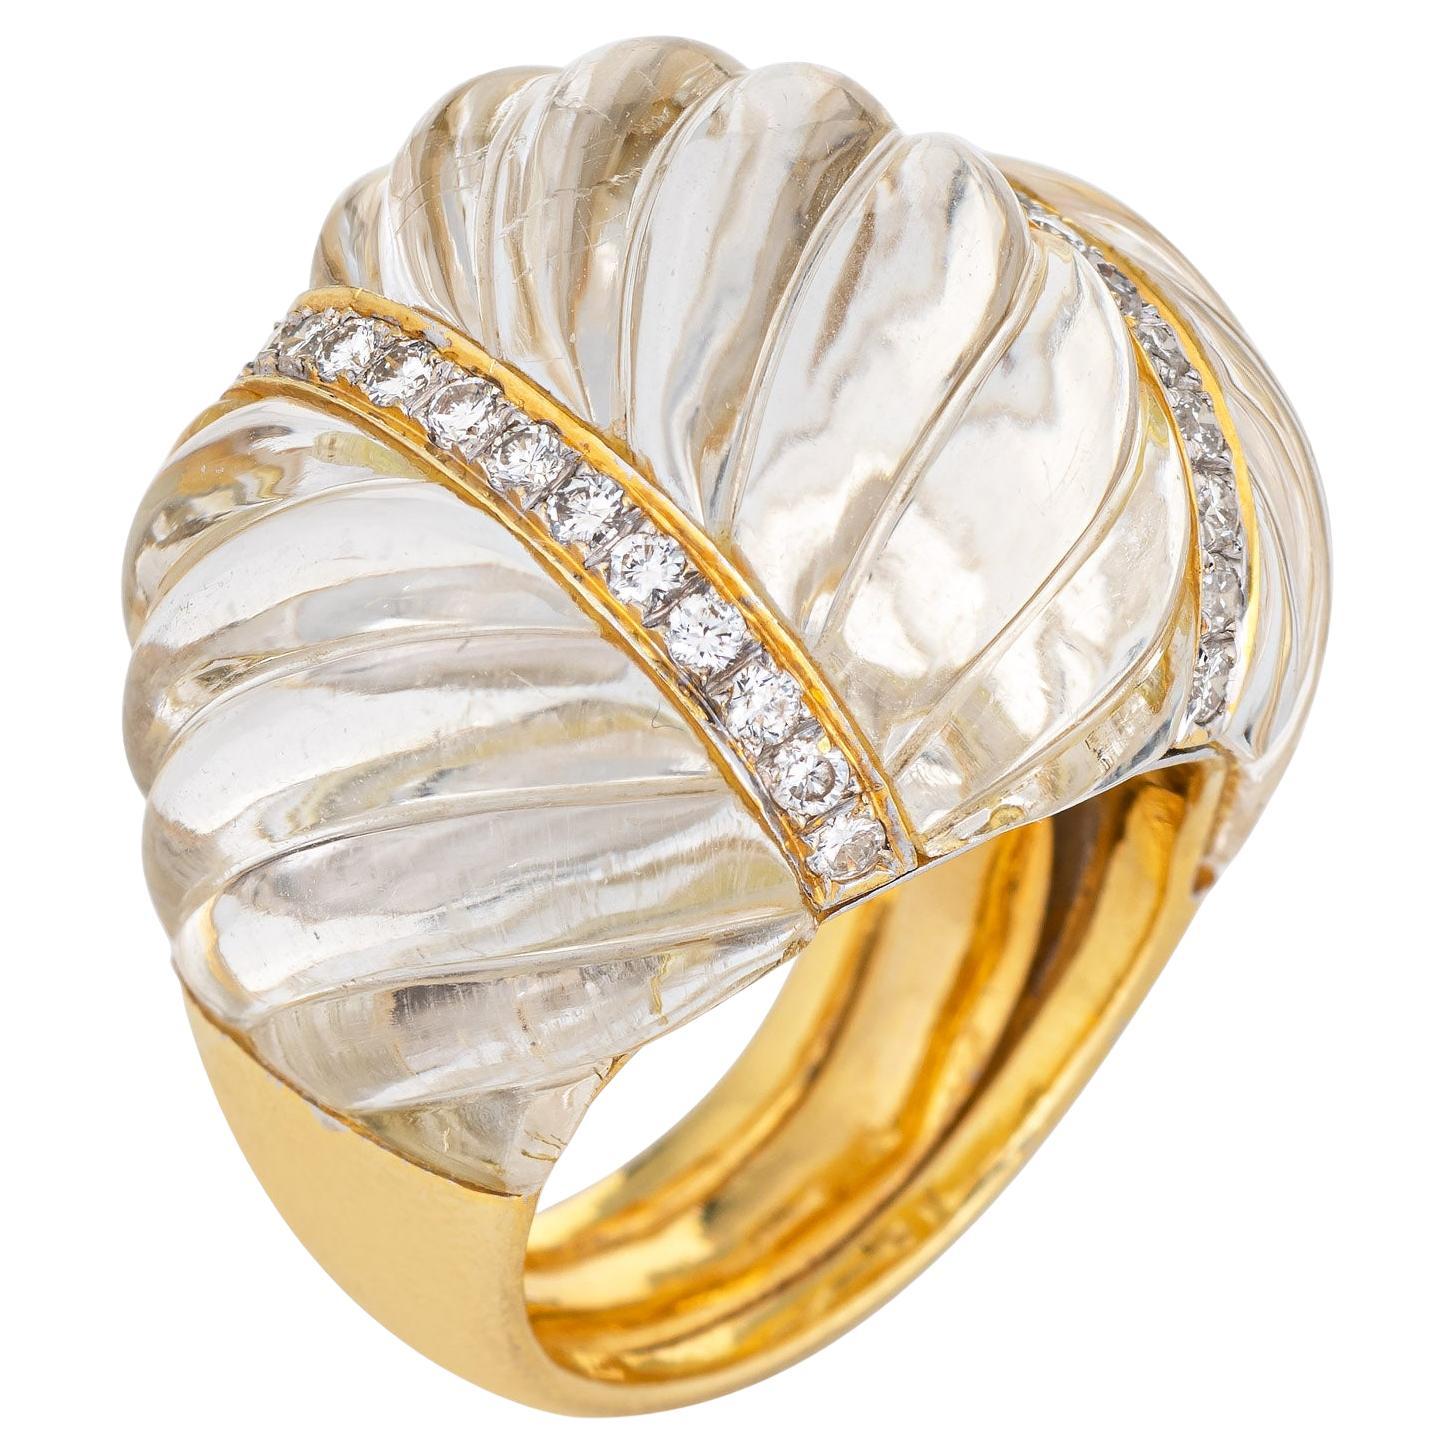 Fluted Rock Crystal Diamond Ring Dome Cocktail Vintage 18k Gold Jewelry Sz 7